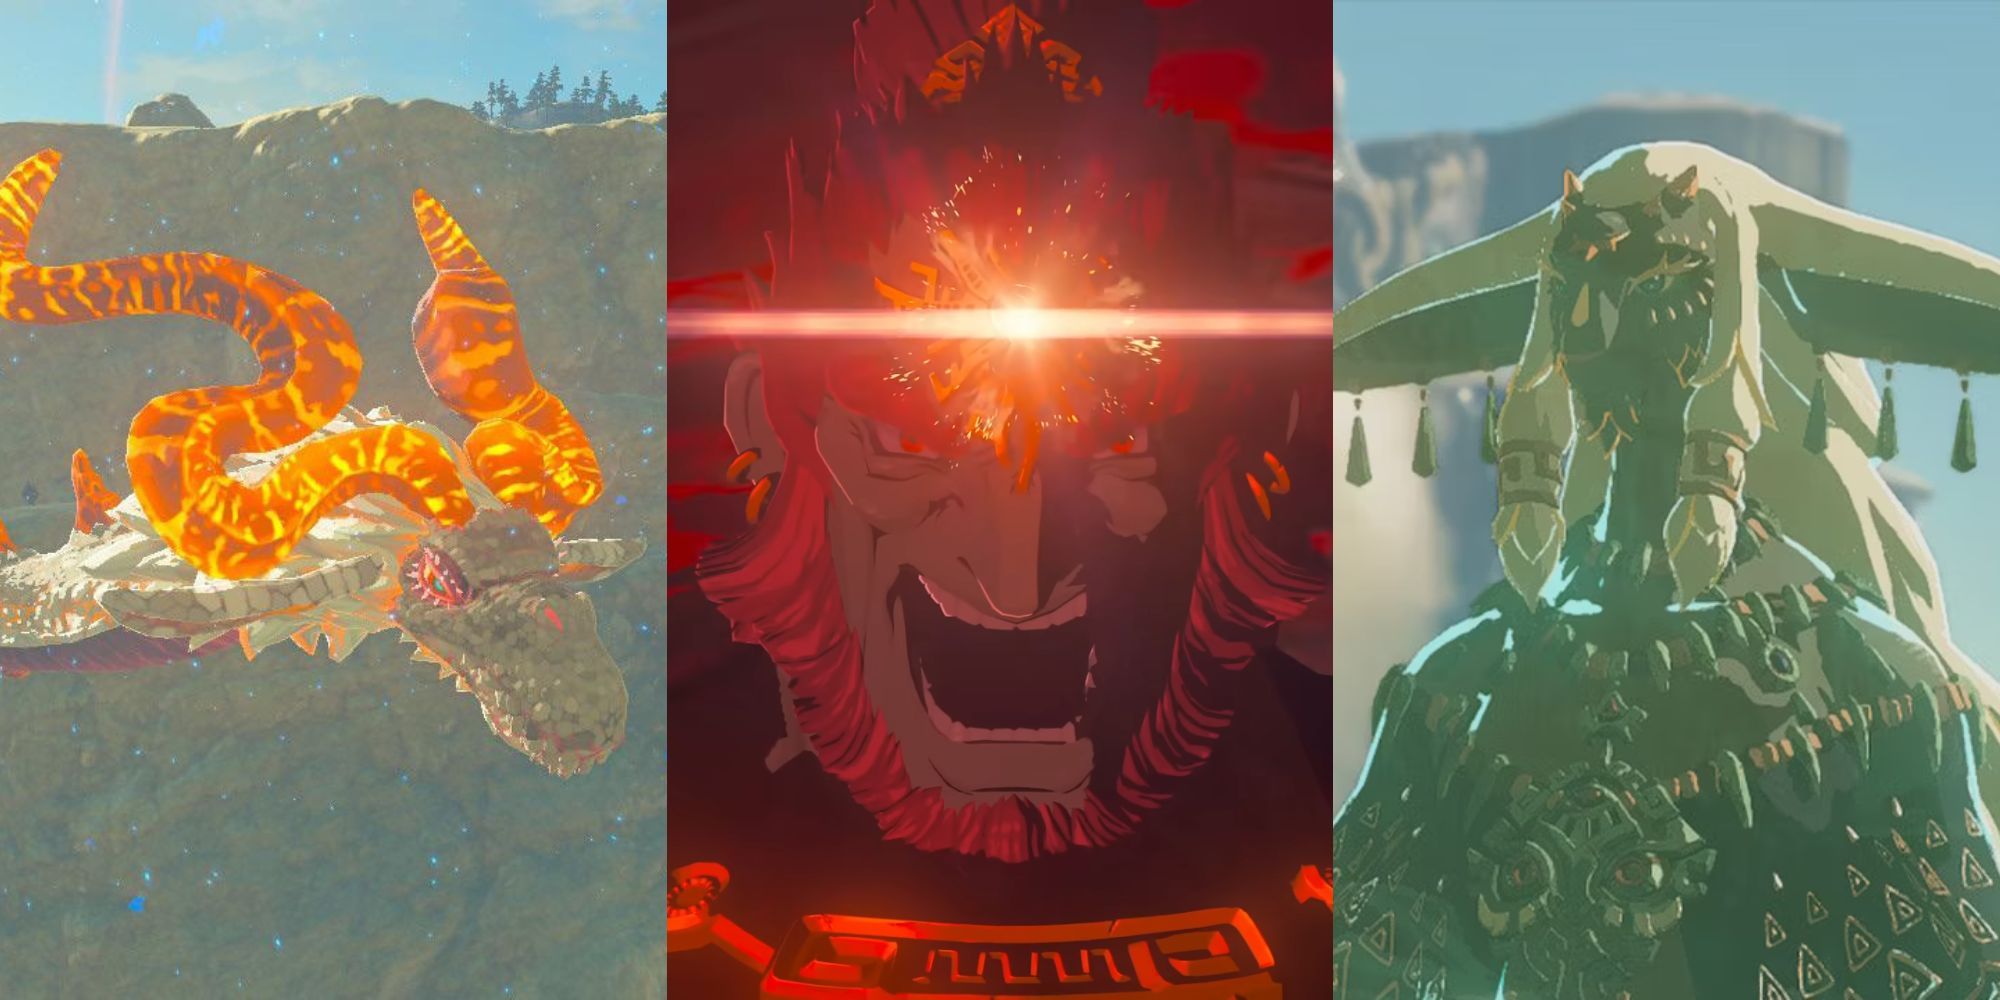 A collage of various Mysteries from BOTW that were answered in TOTK: The origin of the dragons, Ganondorf's Identity and King Rauru of the Zonai Tribe.